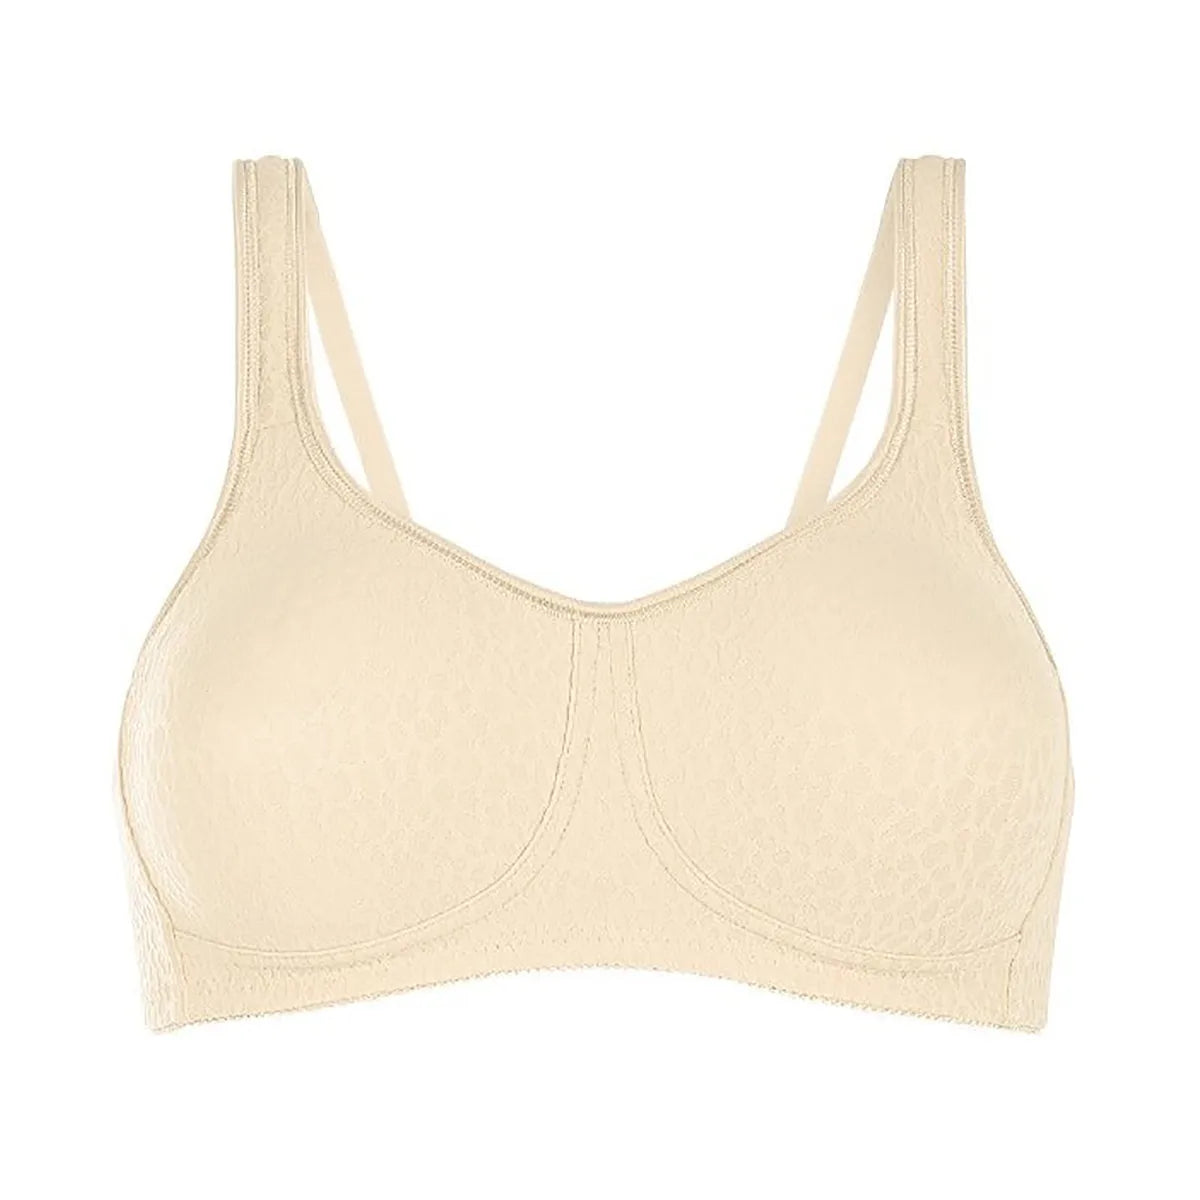 Amoena Performance Sports Bra, Soft Cup, with Adjustable Strap, Size 36AA,  White Ref# 5265436AAWH KU54109320-Each - MAR-J Medical Supply, Inc.